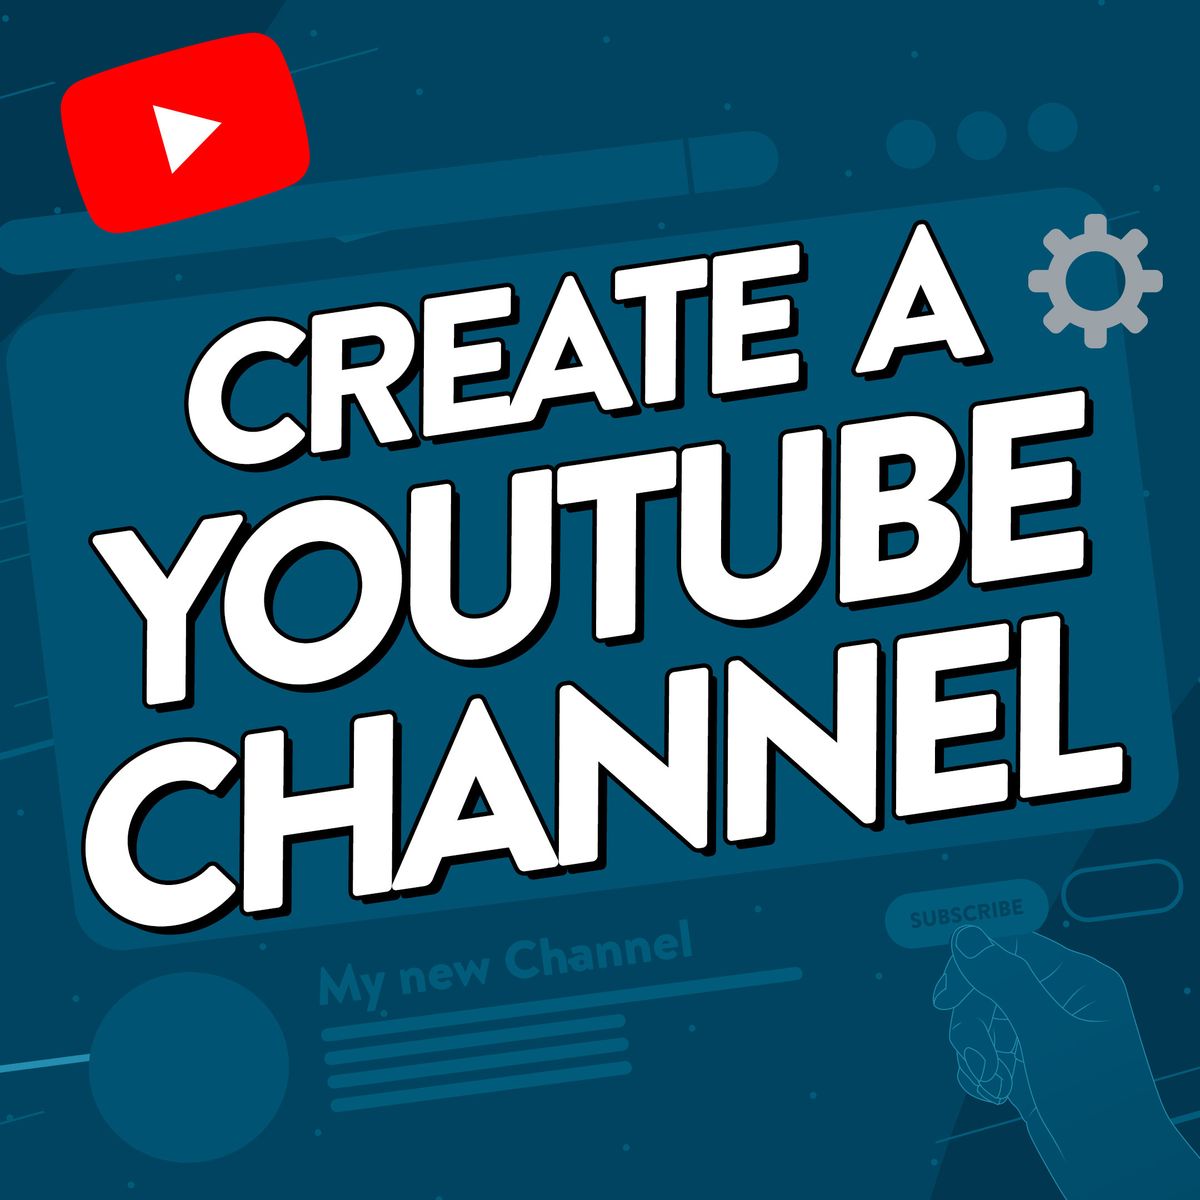 Illustration of how to create a YouTube channel.